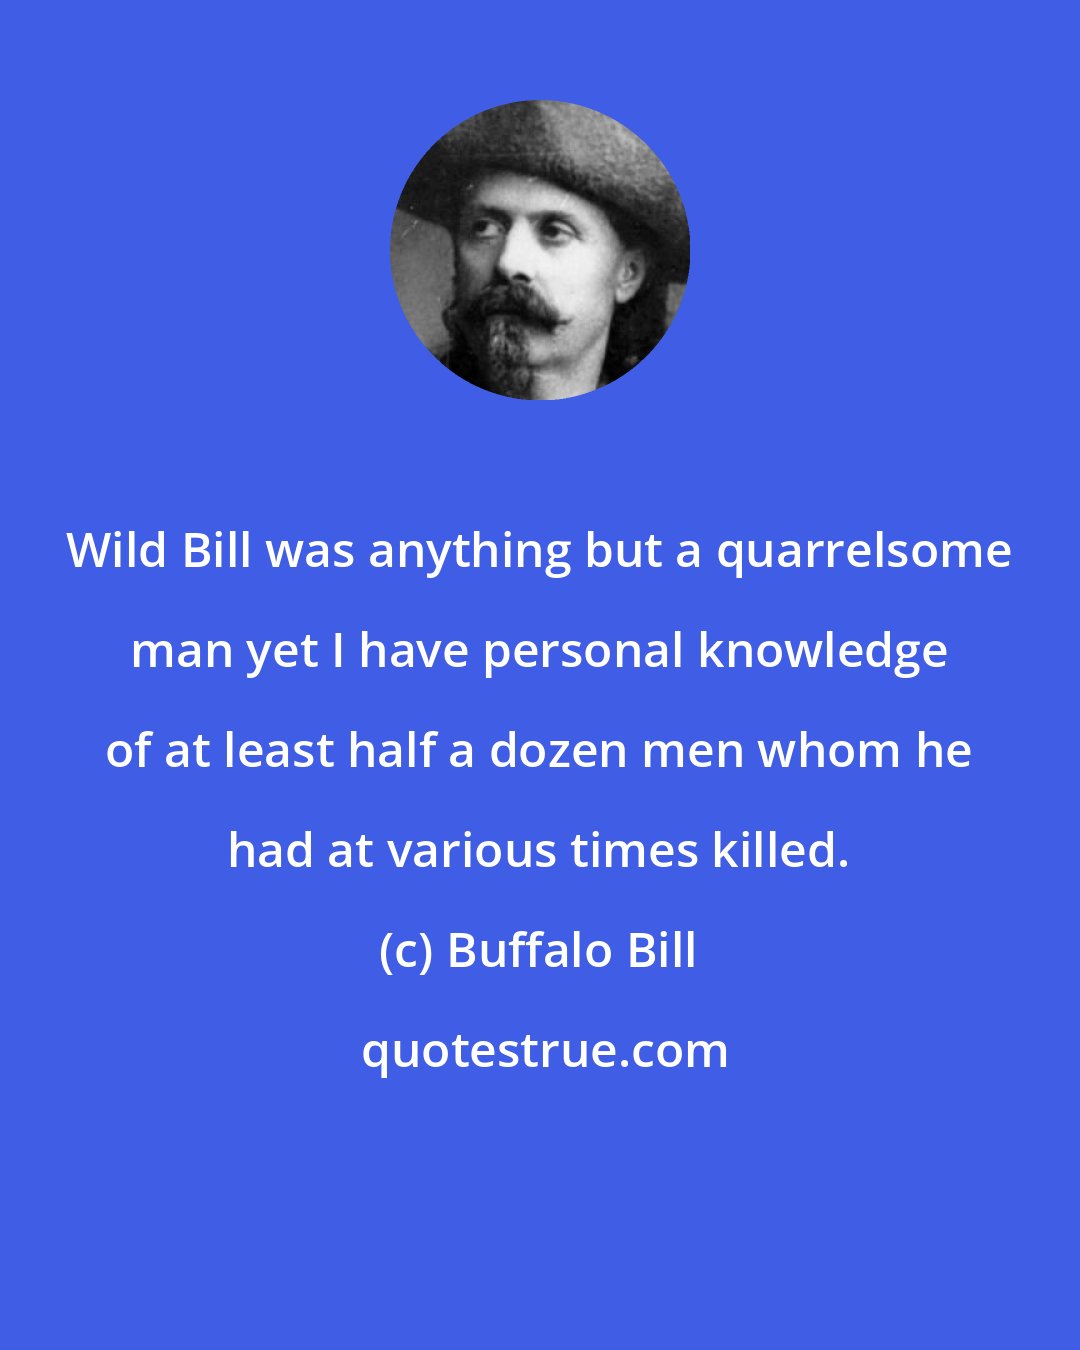 Buffalo Bill: Wild Bill was anything but a quarrelsome man yet I have personal knowledge of at least half a dozen men whom he had at various times killed.